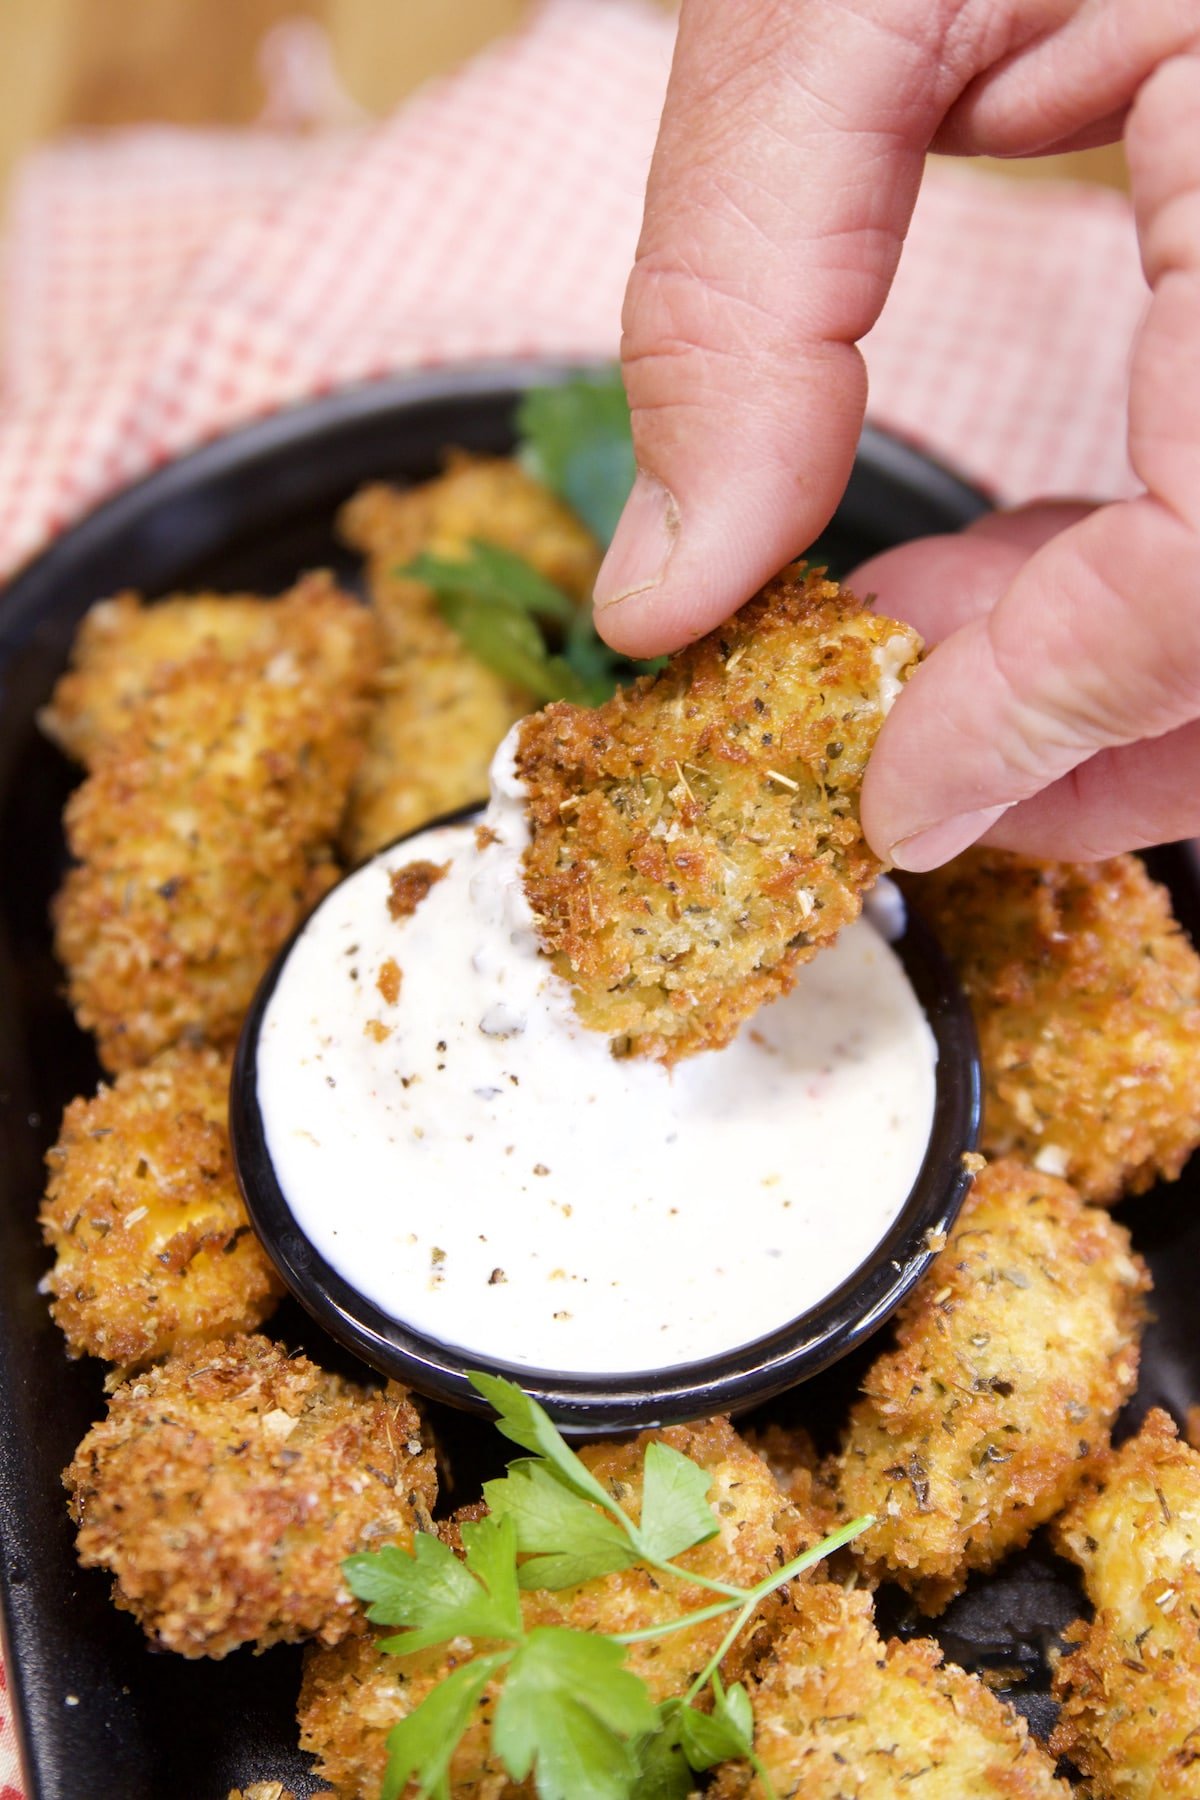 Dipping fried cheese curd in ranch.